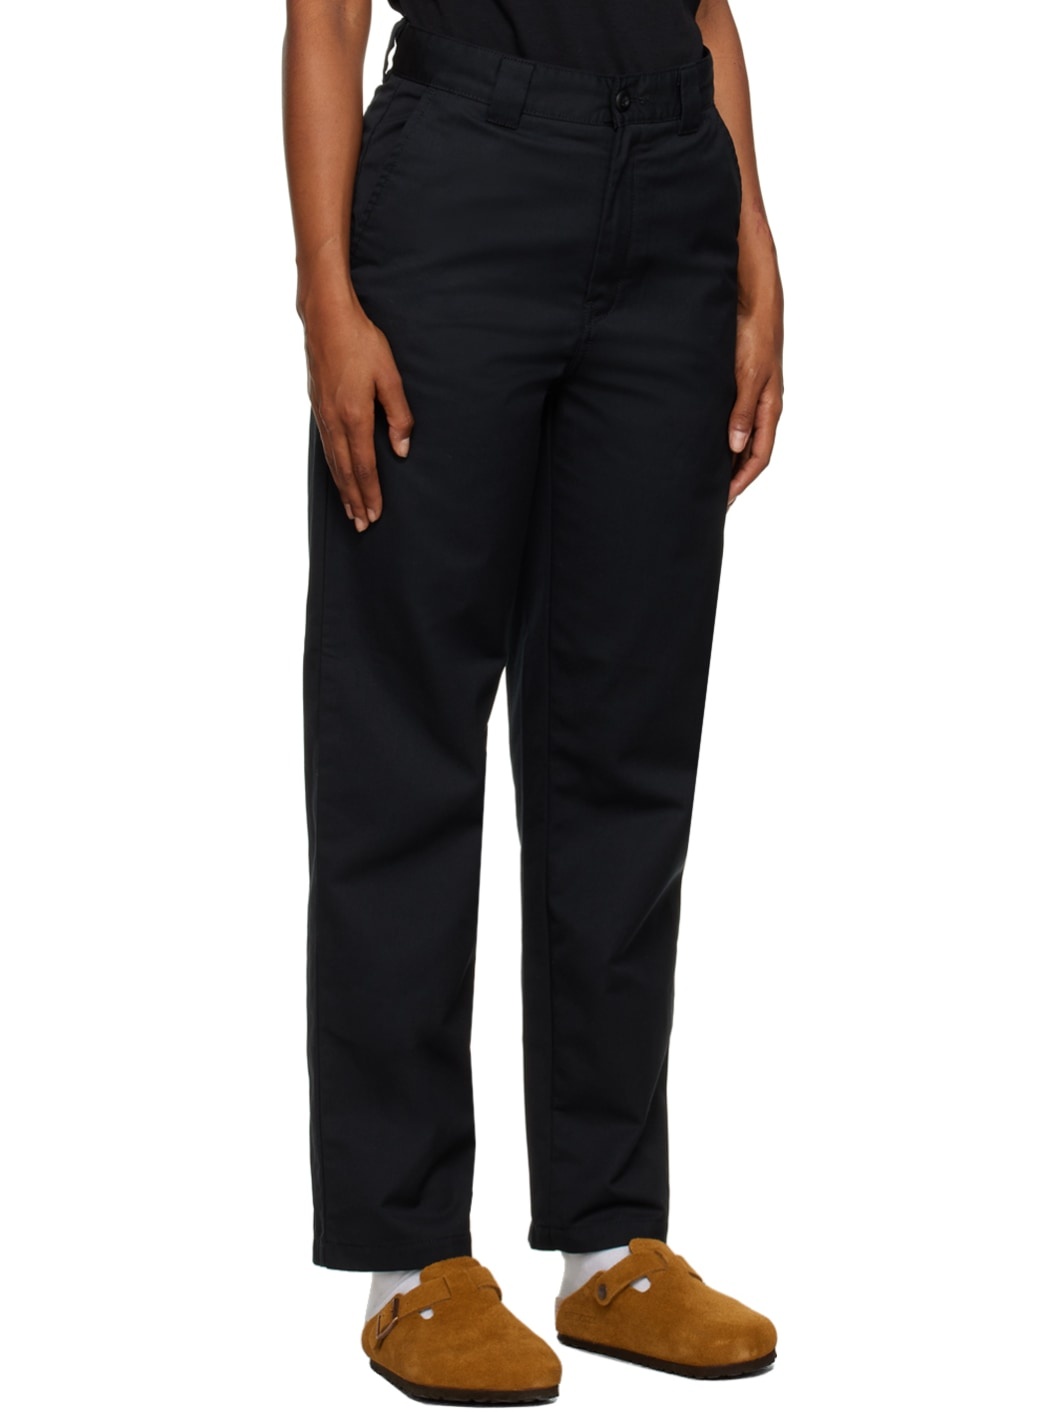 Black Master Trousers - 2